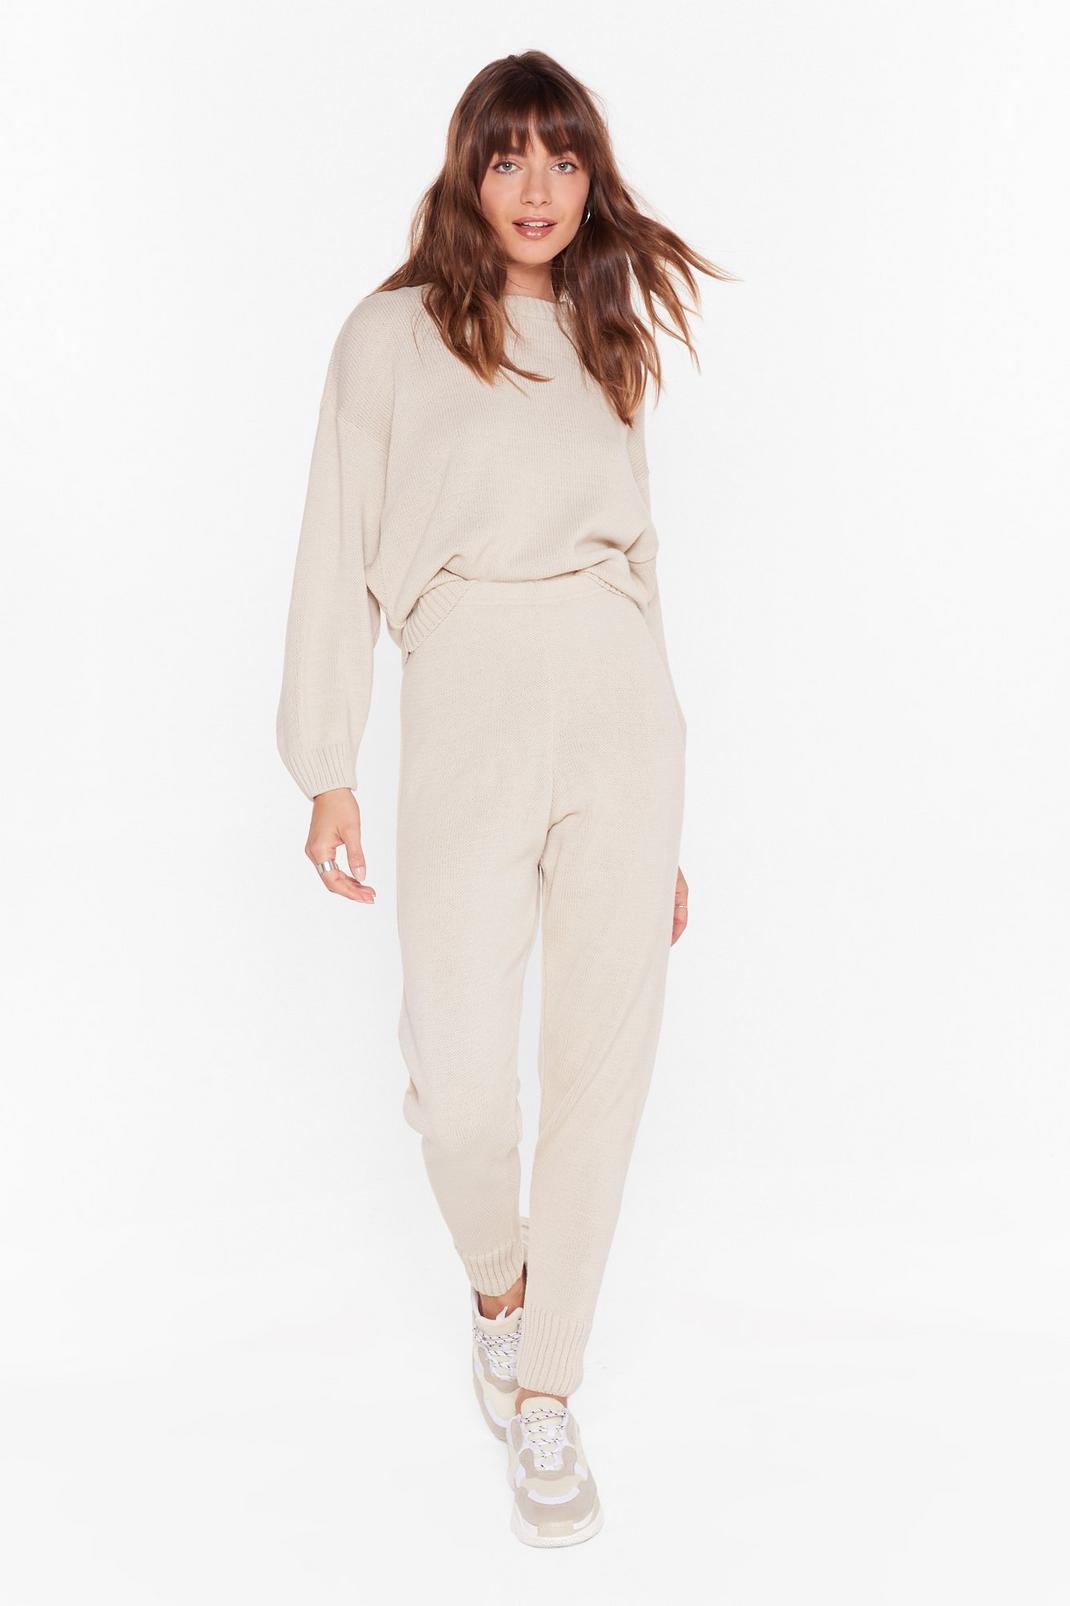 Lounge What I Was Looking For Knitted Joggers Set | Nasty Gal